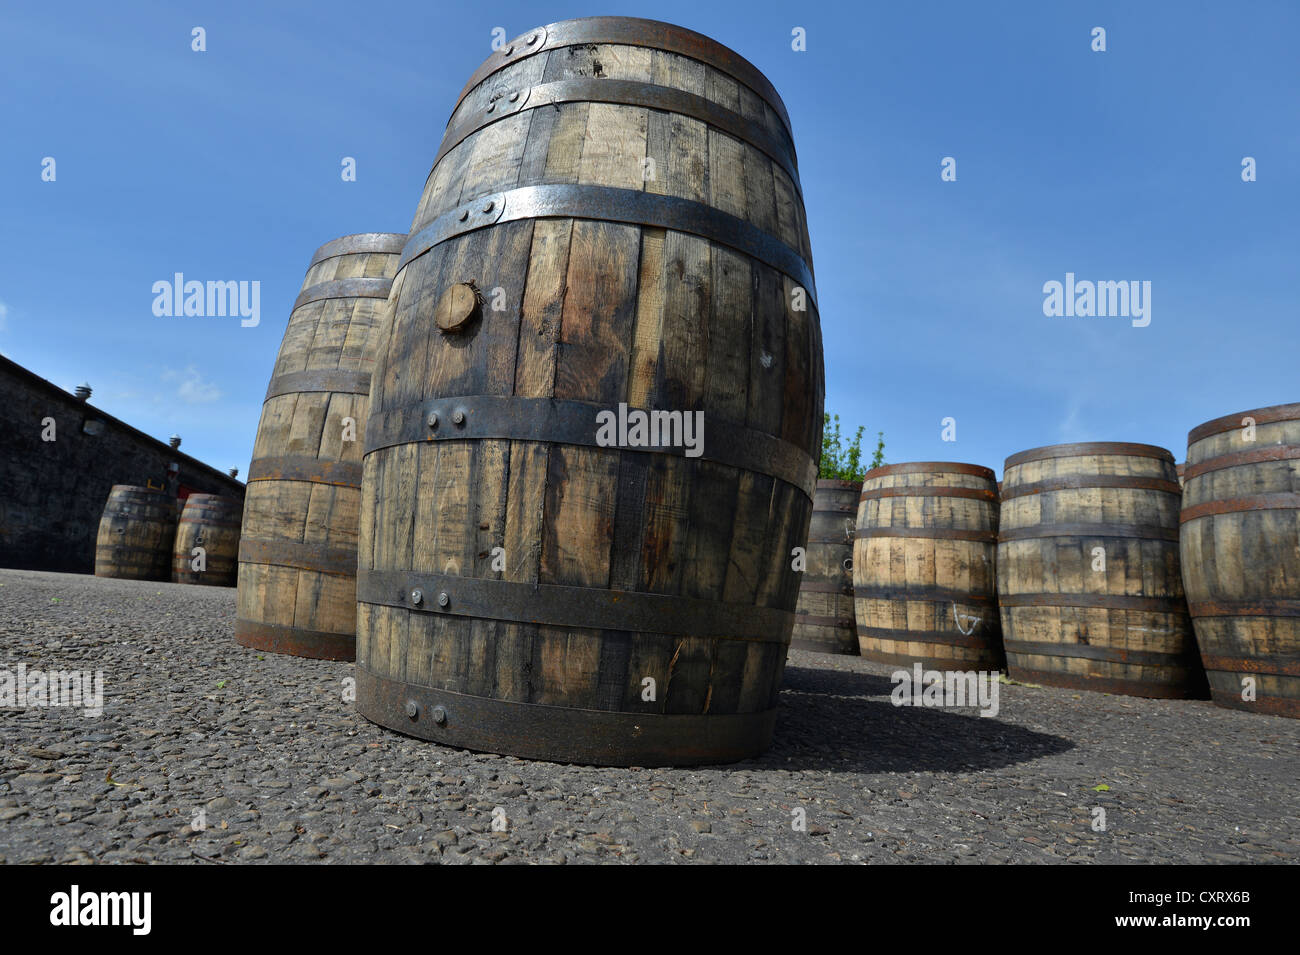 Whiskey barrels from America which had been used as Boubon whiskey barrels, now waiting to be reused for Scotch Single Malt Stock Photo